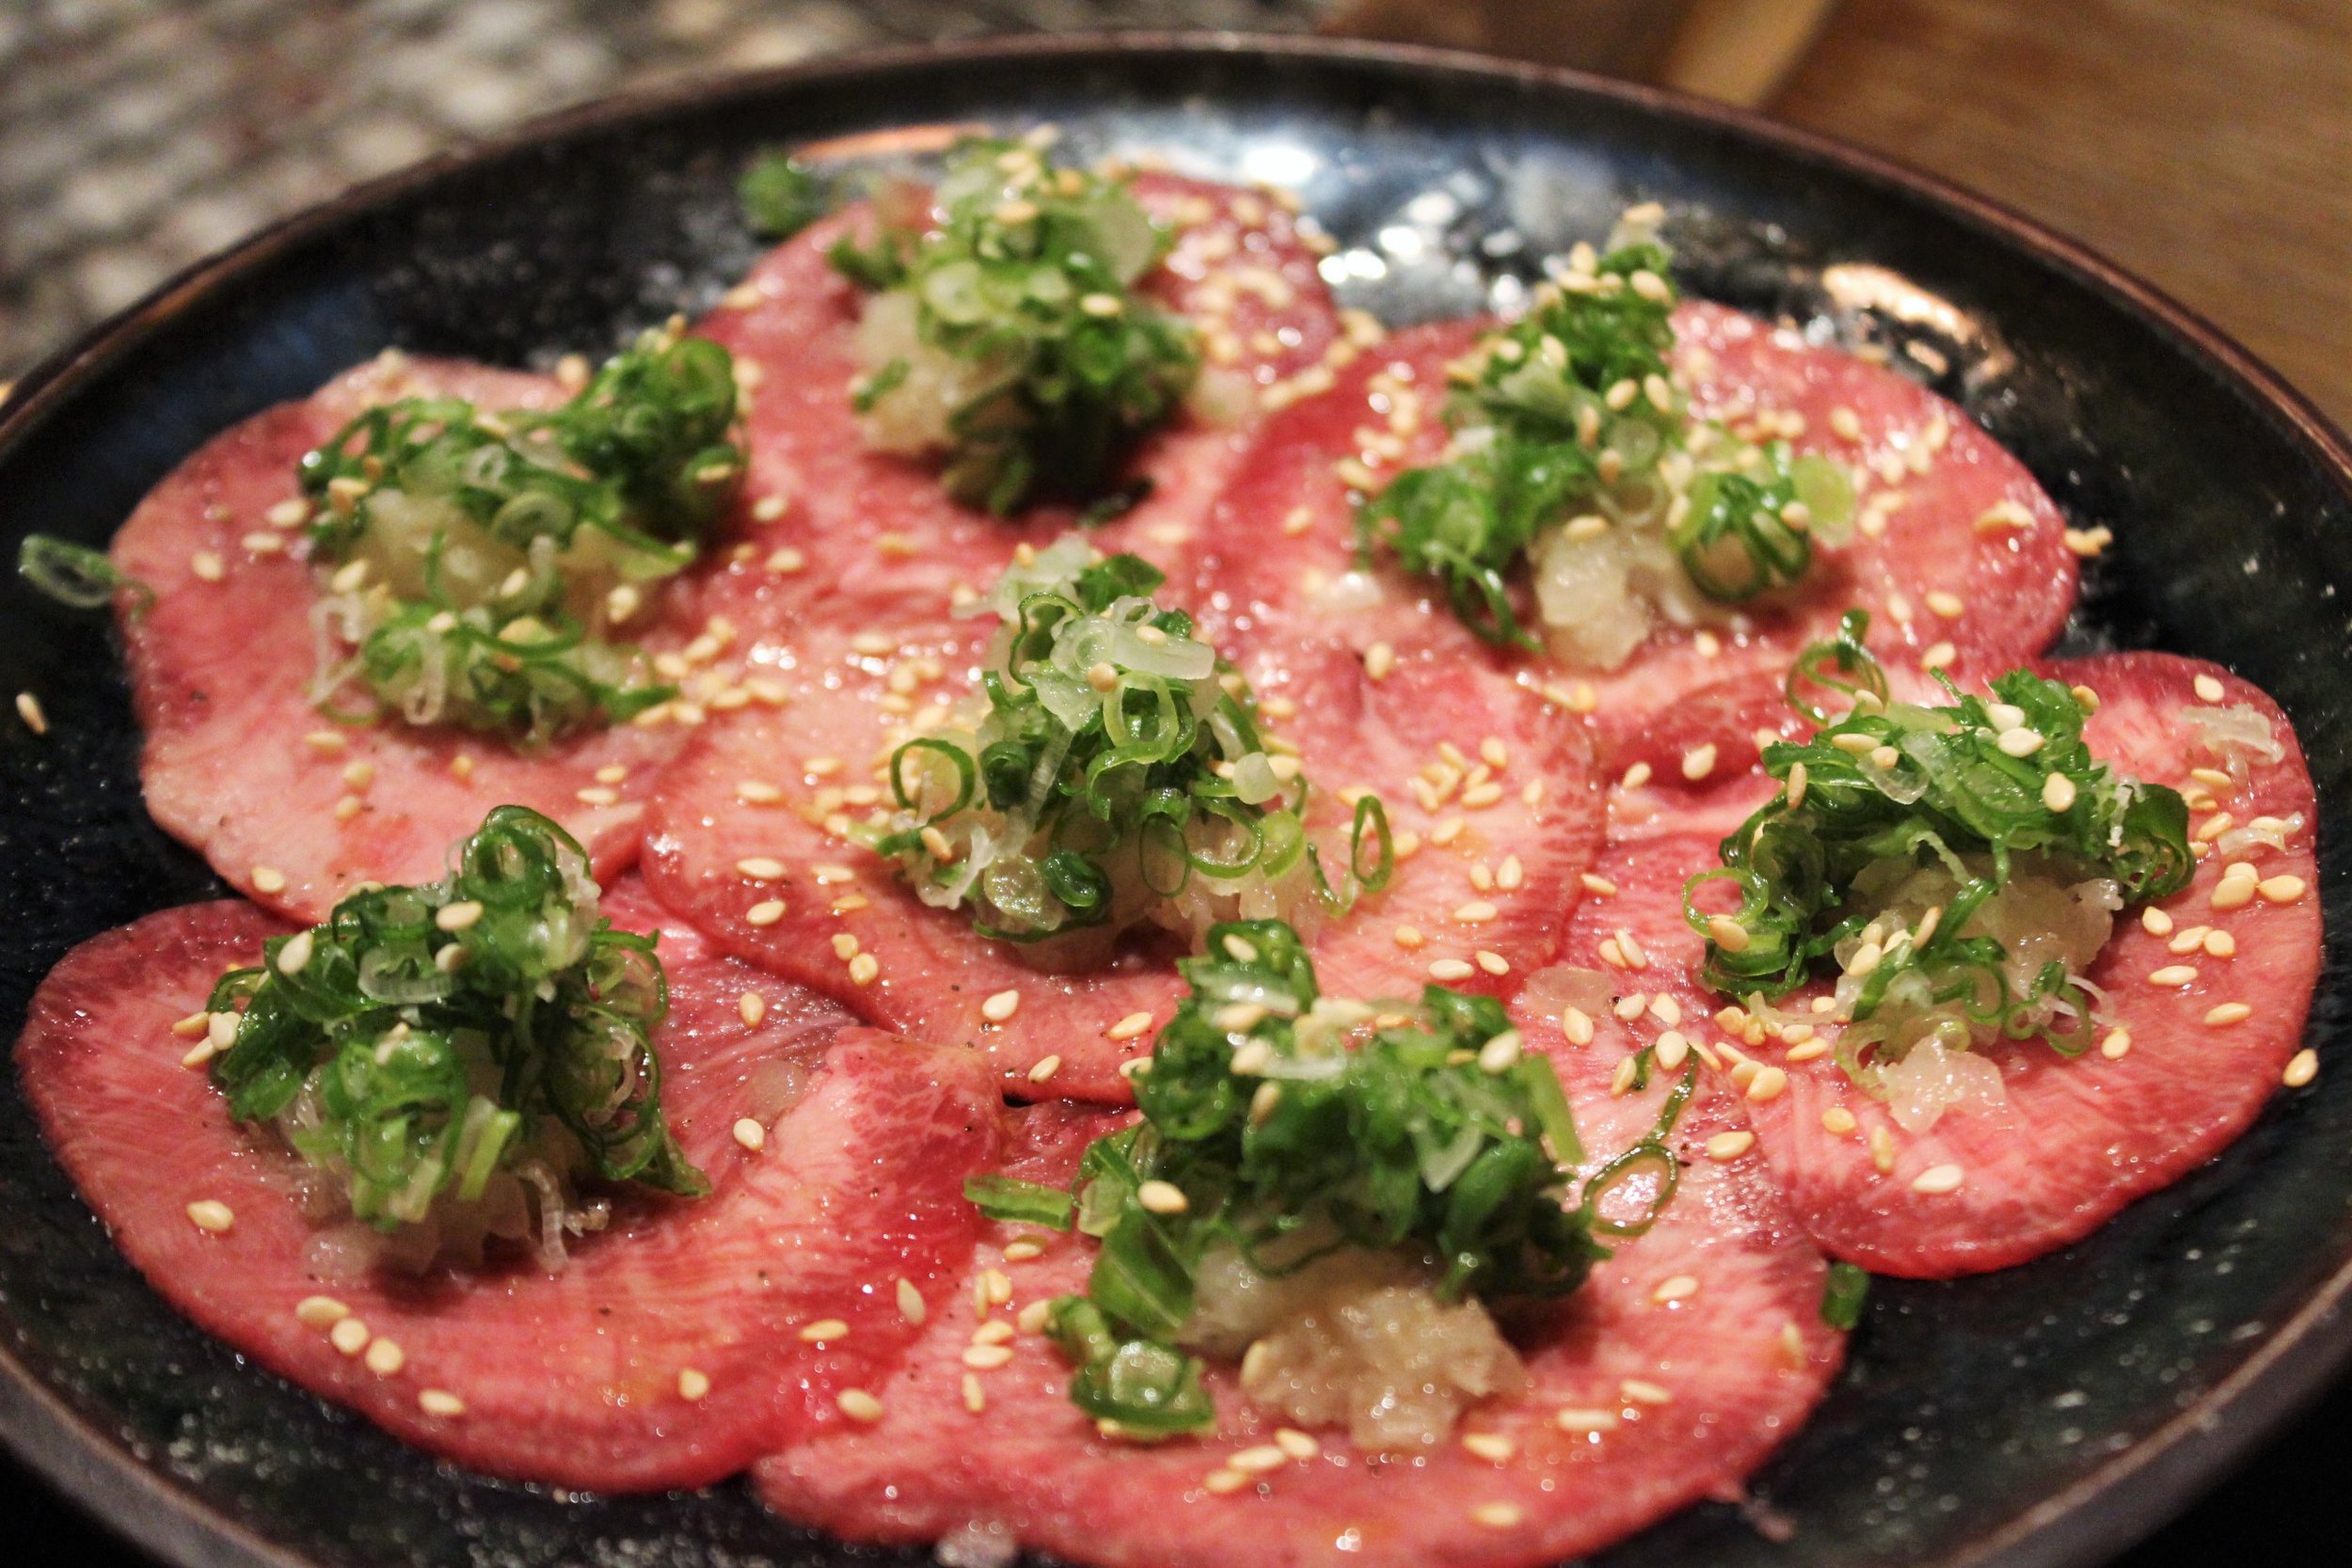 Beef Tongue with Onion, Scallions, Sesame Seeds